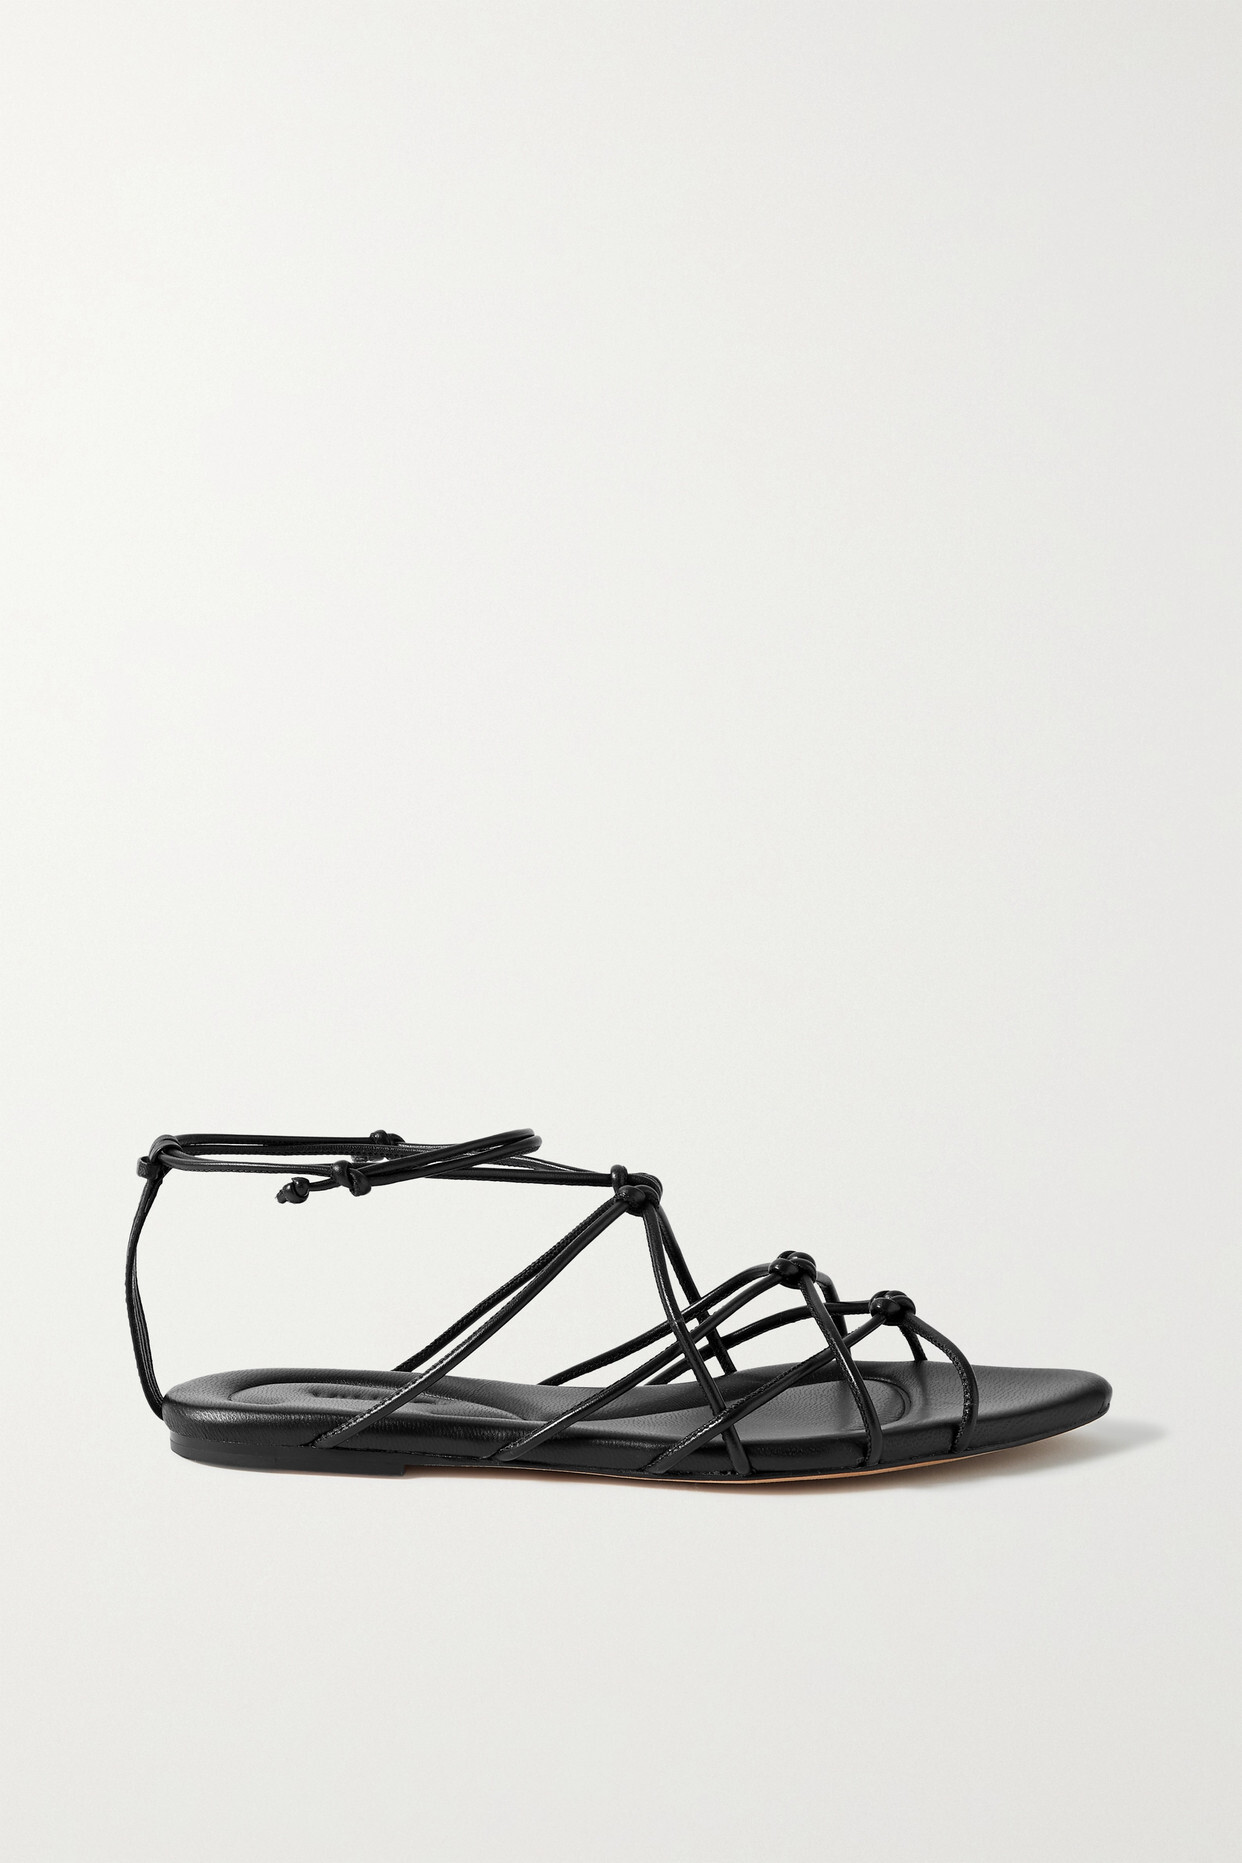 Vince - Kenna Knotted Leather Sandals - Black